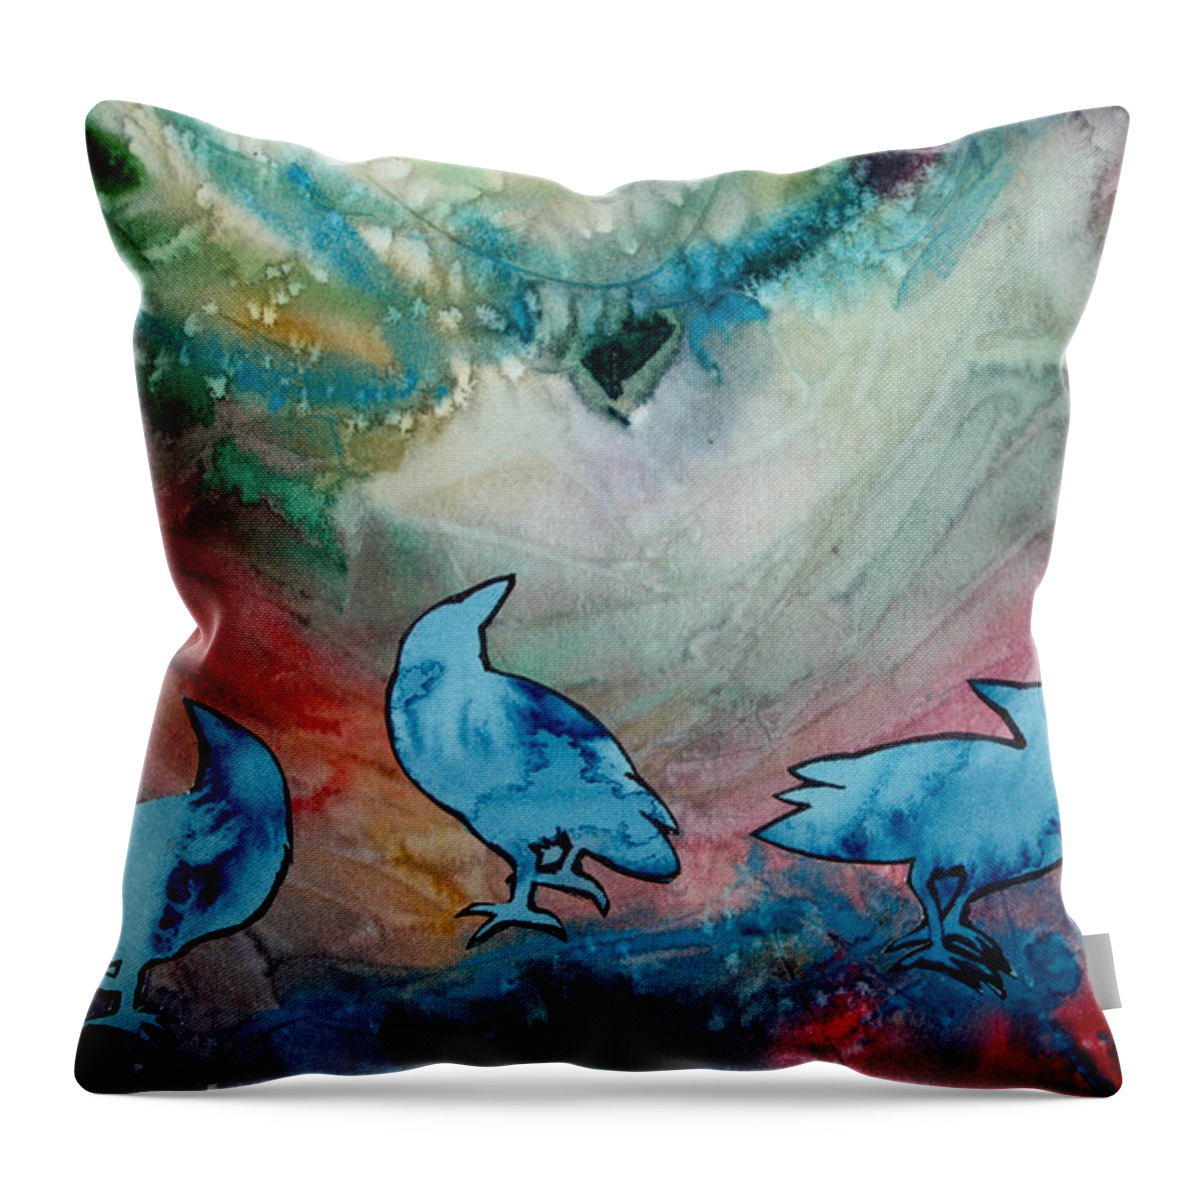 Crow Throw Pillow featuring the painting Crow Series 3 by Helen Klebesadel